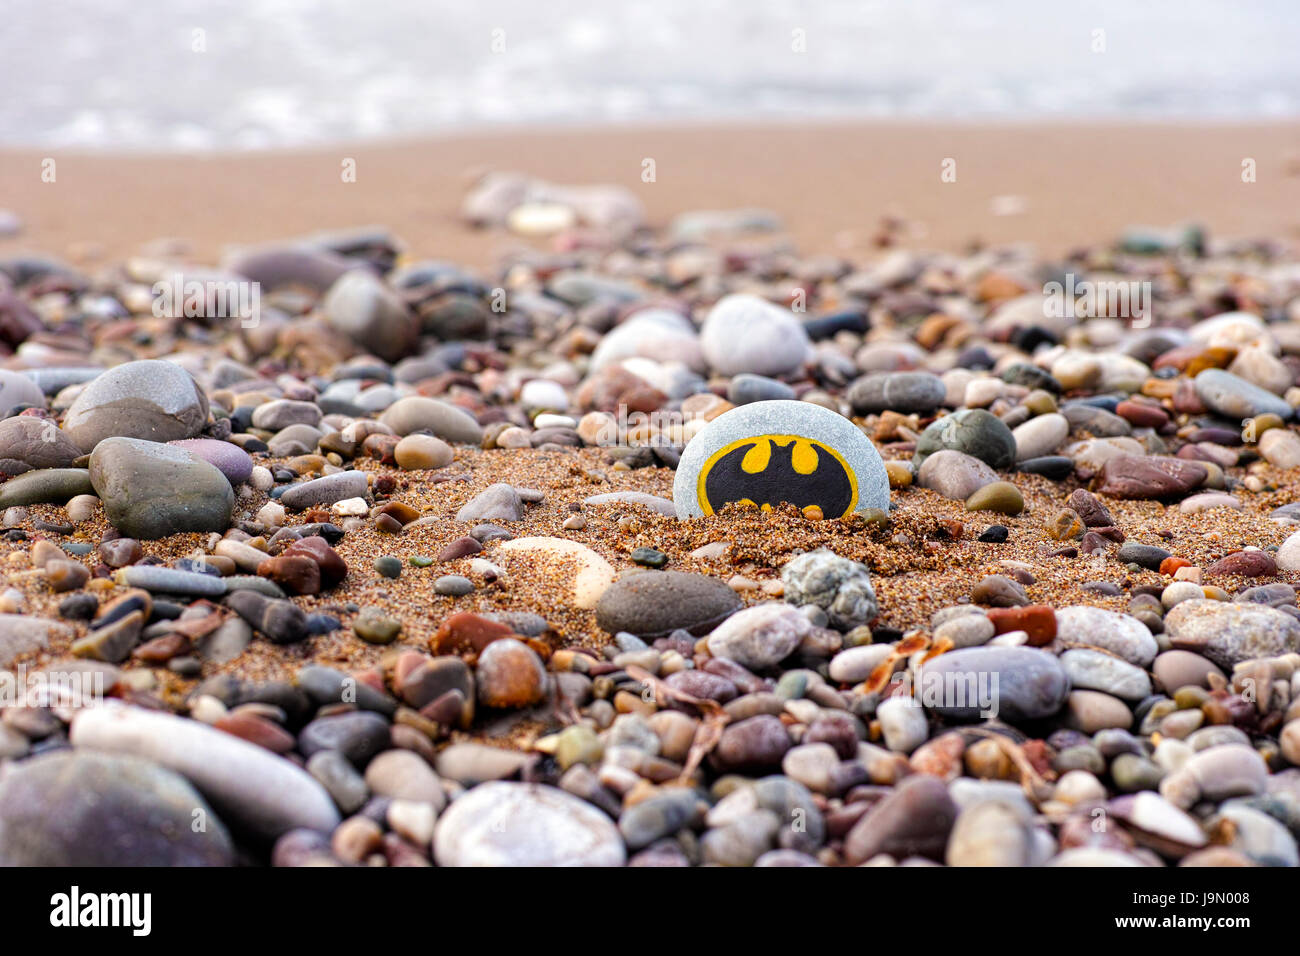 Paphos, Cyprus - November 22, 2016 Pebble with painted sign Batman lying on the sea beach with sand and stones. Stock Photo